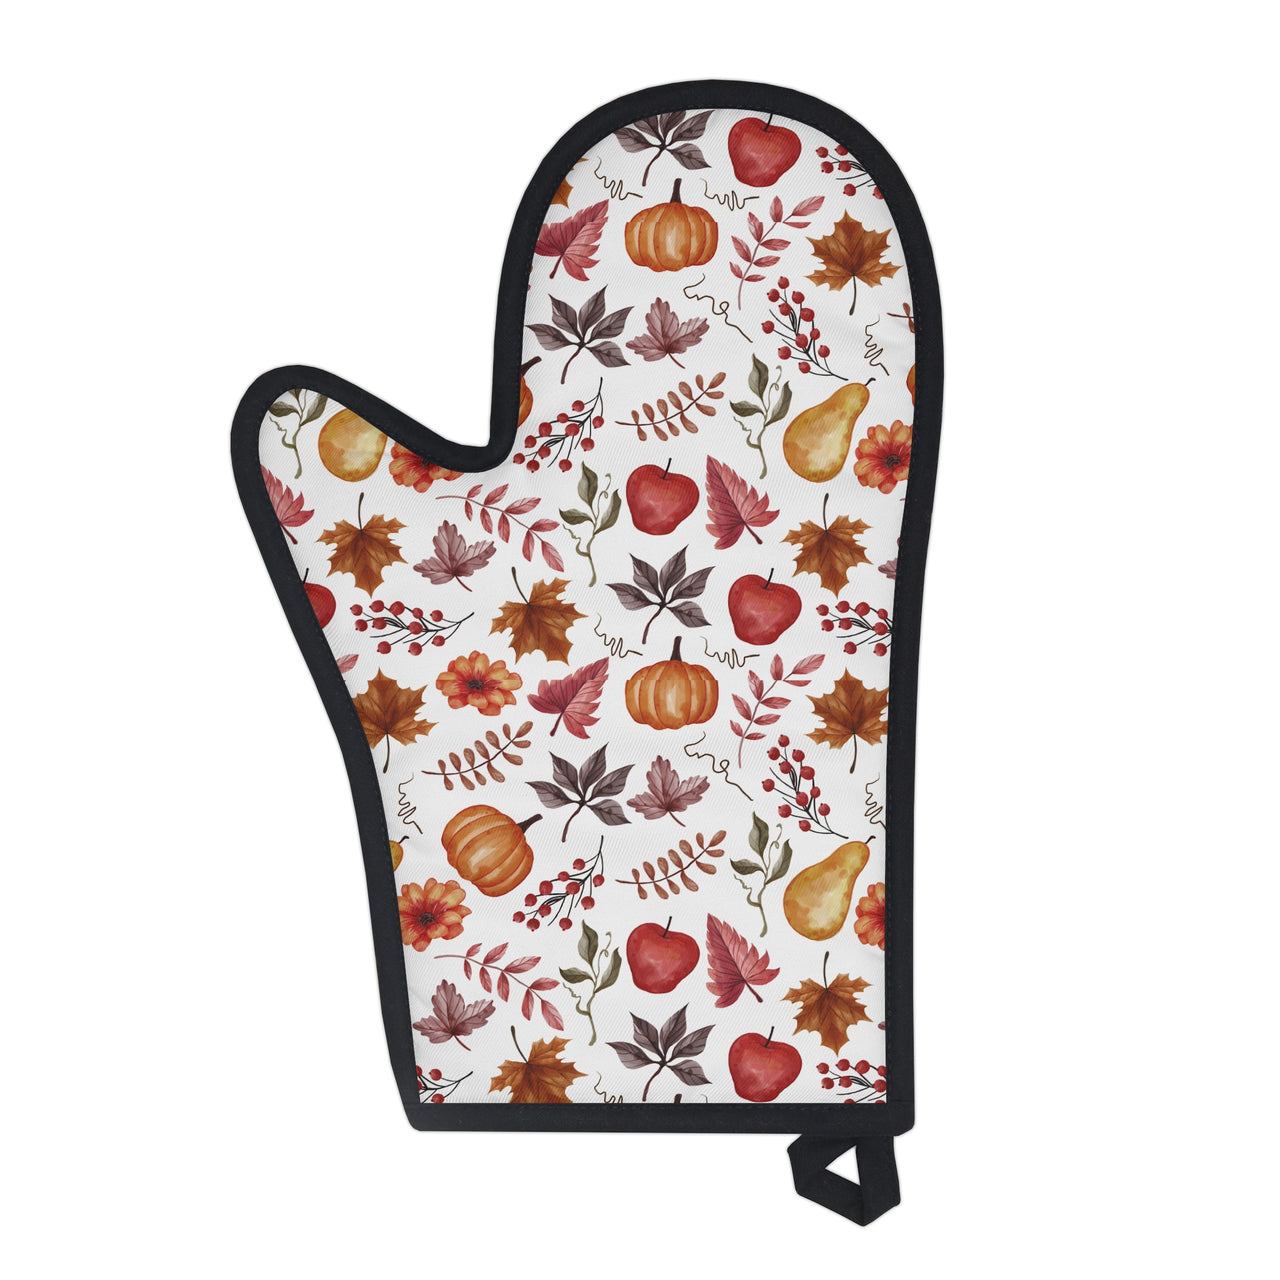 Fall Leaves Oven Glove, Autumn Oven Glove, Thanksgiving Oven Glove